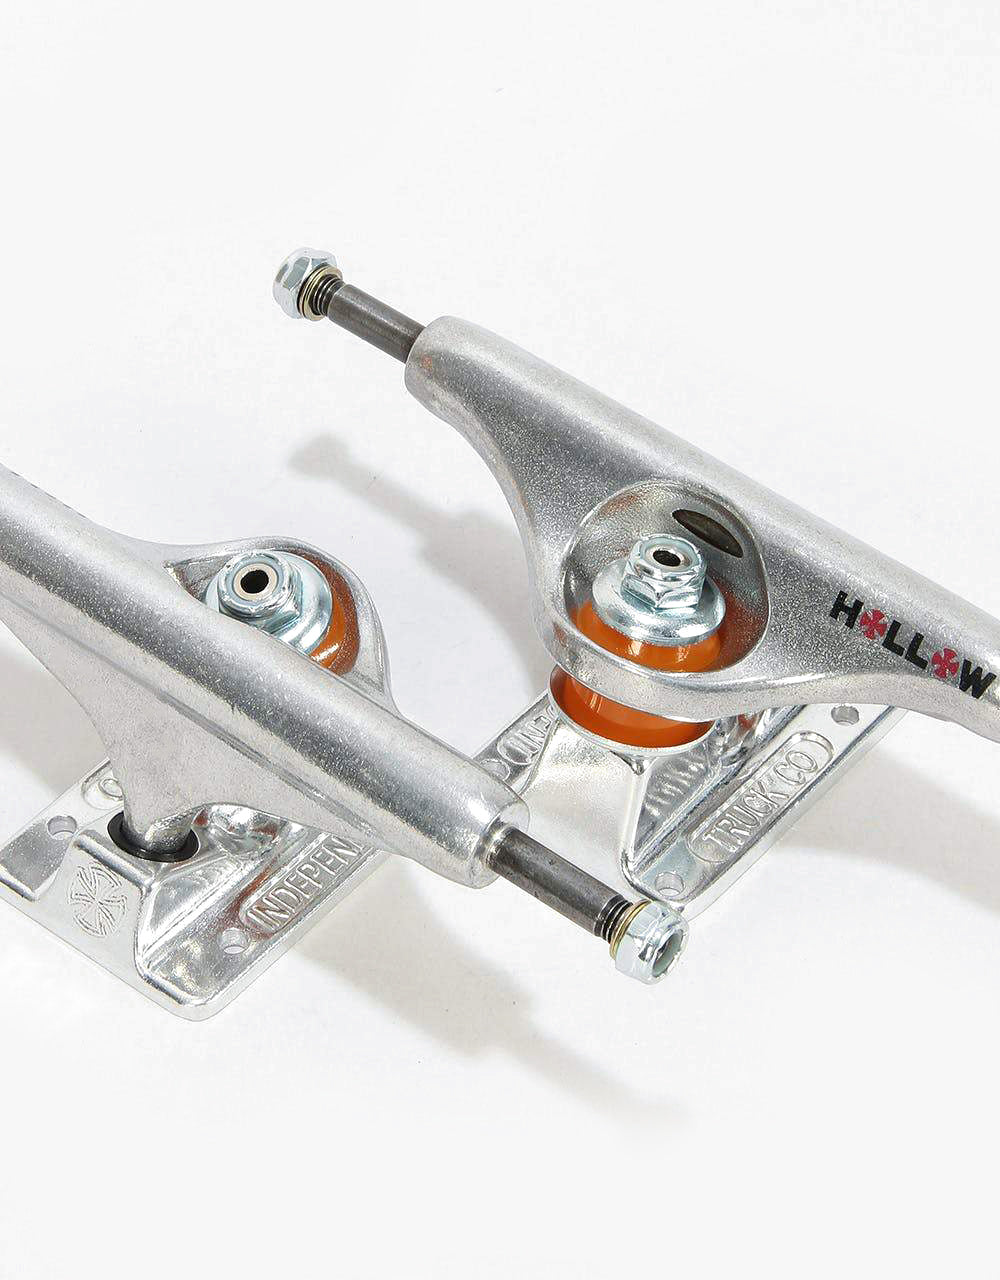 Independent Stage 11 Hollow Forged 144 Standard Trucks (Pair)